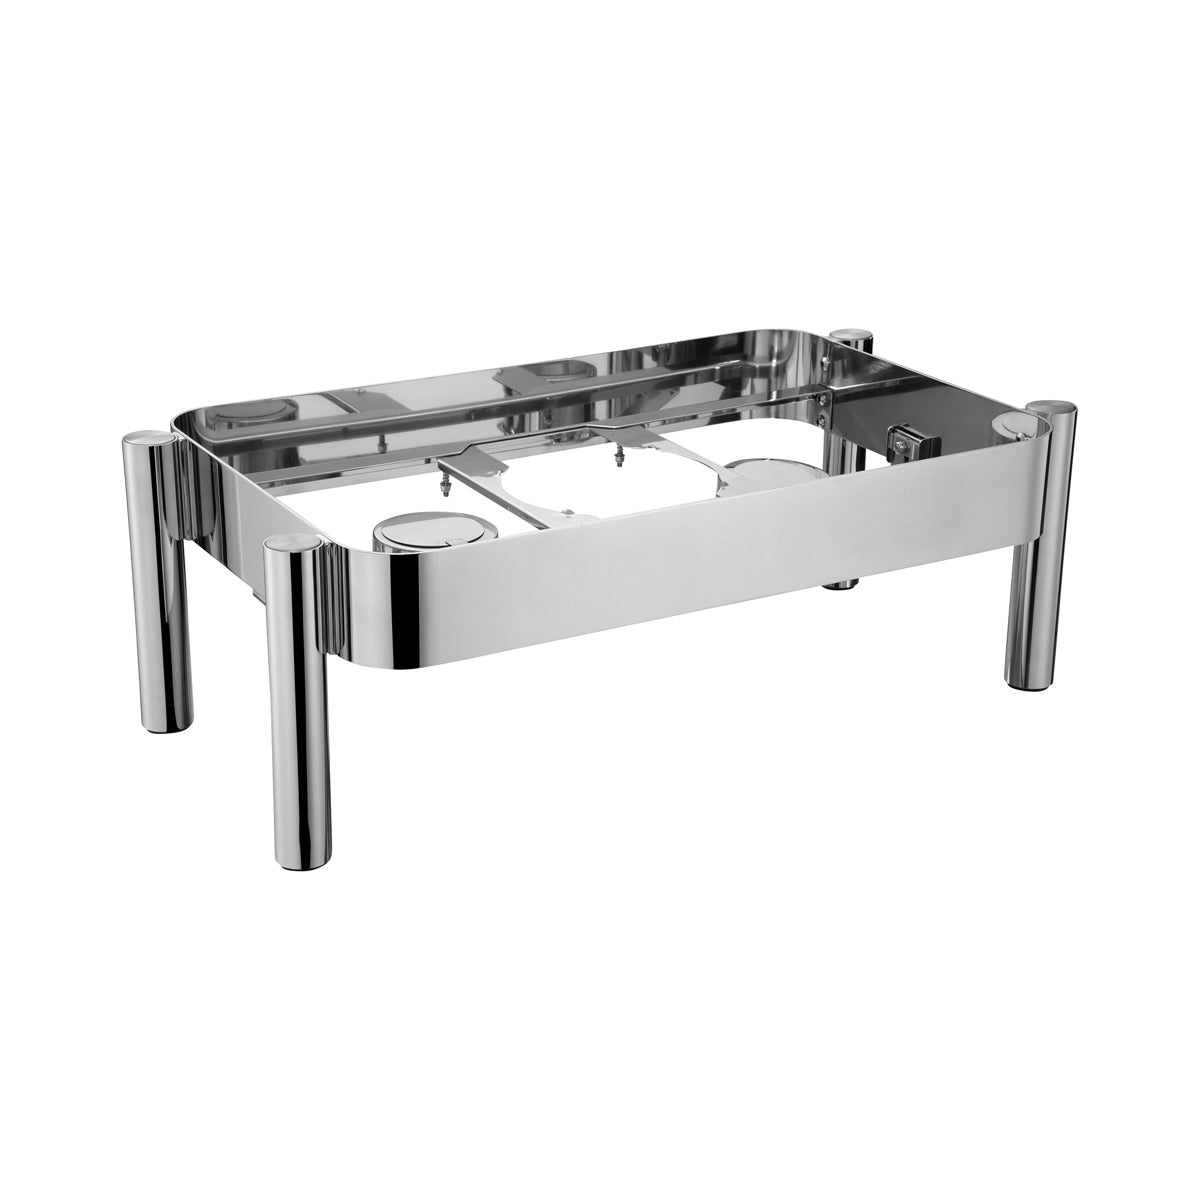 54901-S Chef Inox Chafer Rectangular Stand Stainless Steel 1/1 Size to Suit 54901 Tomkin Australia Hospitality Supplies